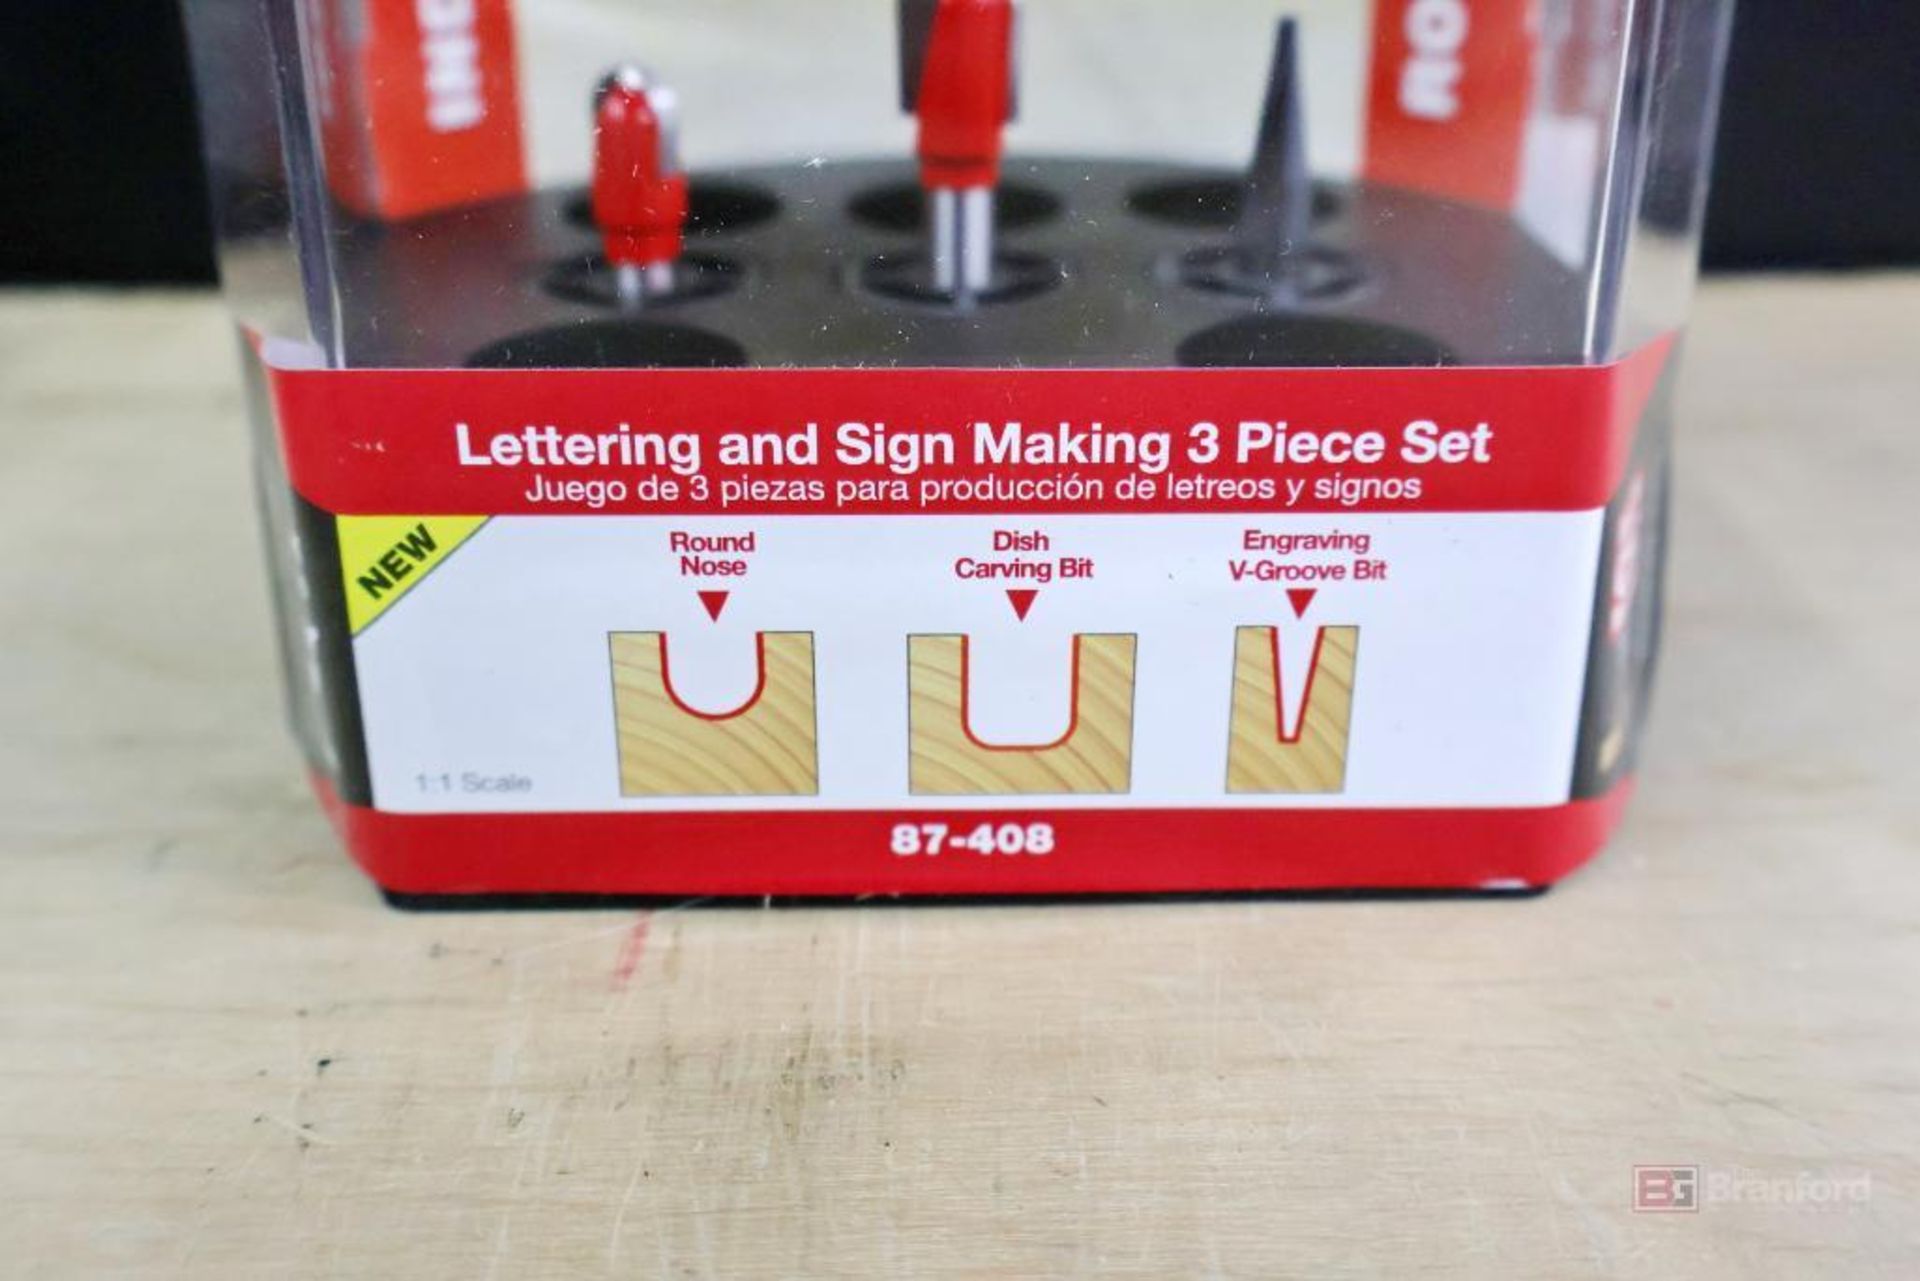 (8) Freud 87-408 Lettering and Sign Making 3 Piece Set - Image 5 of 7